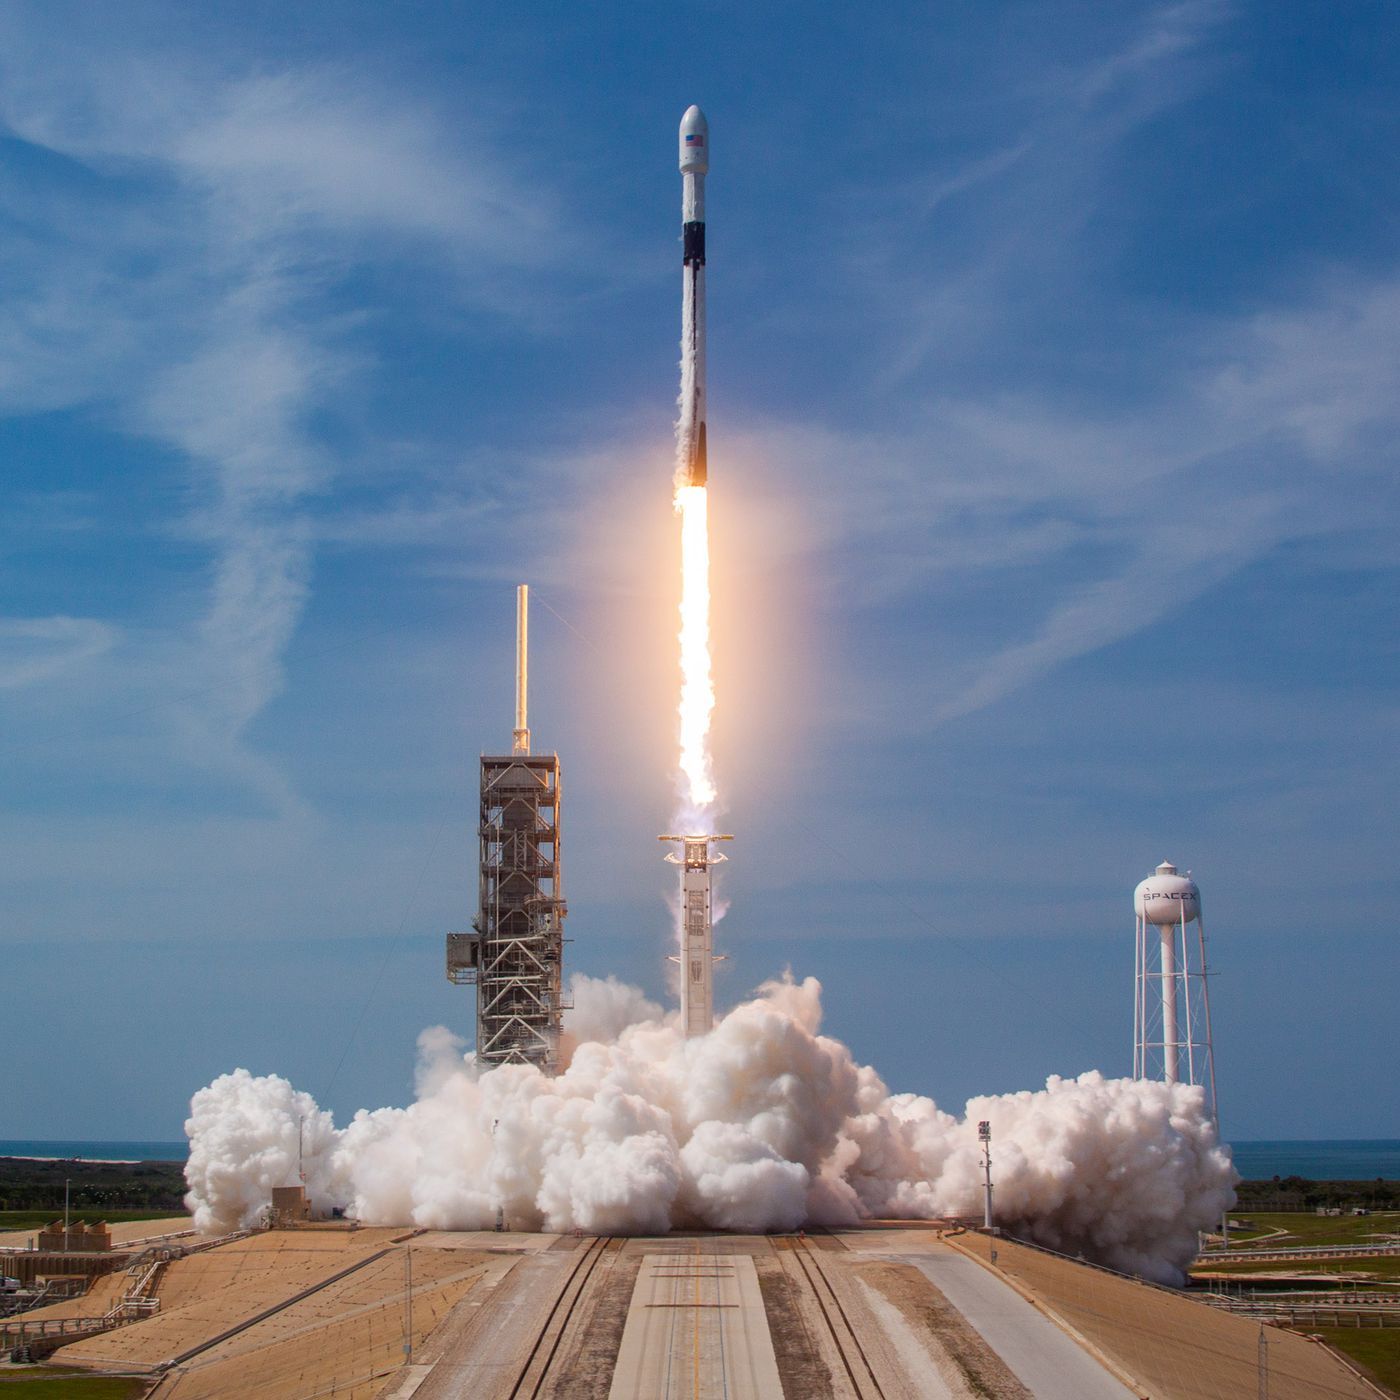 SpaceX's new Falcon 9 rocket still needs a key update before it